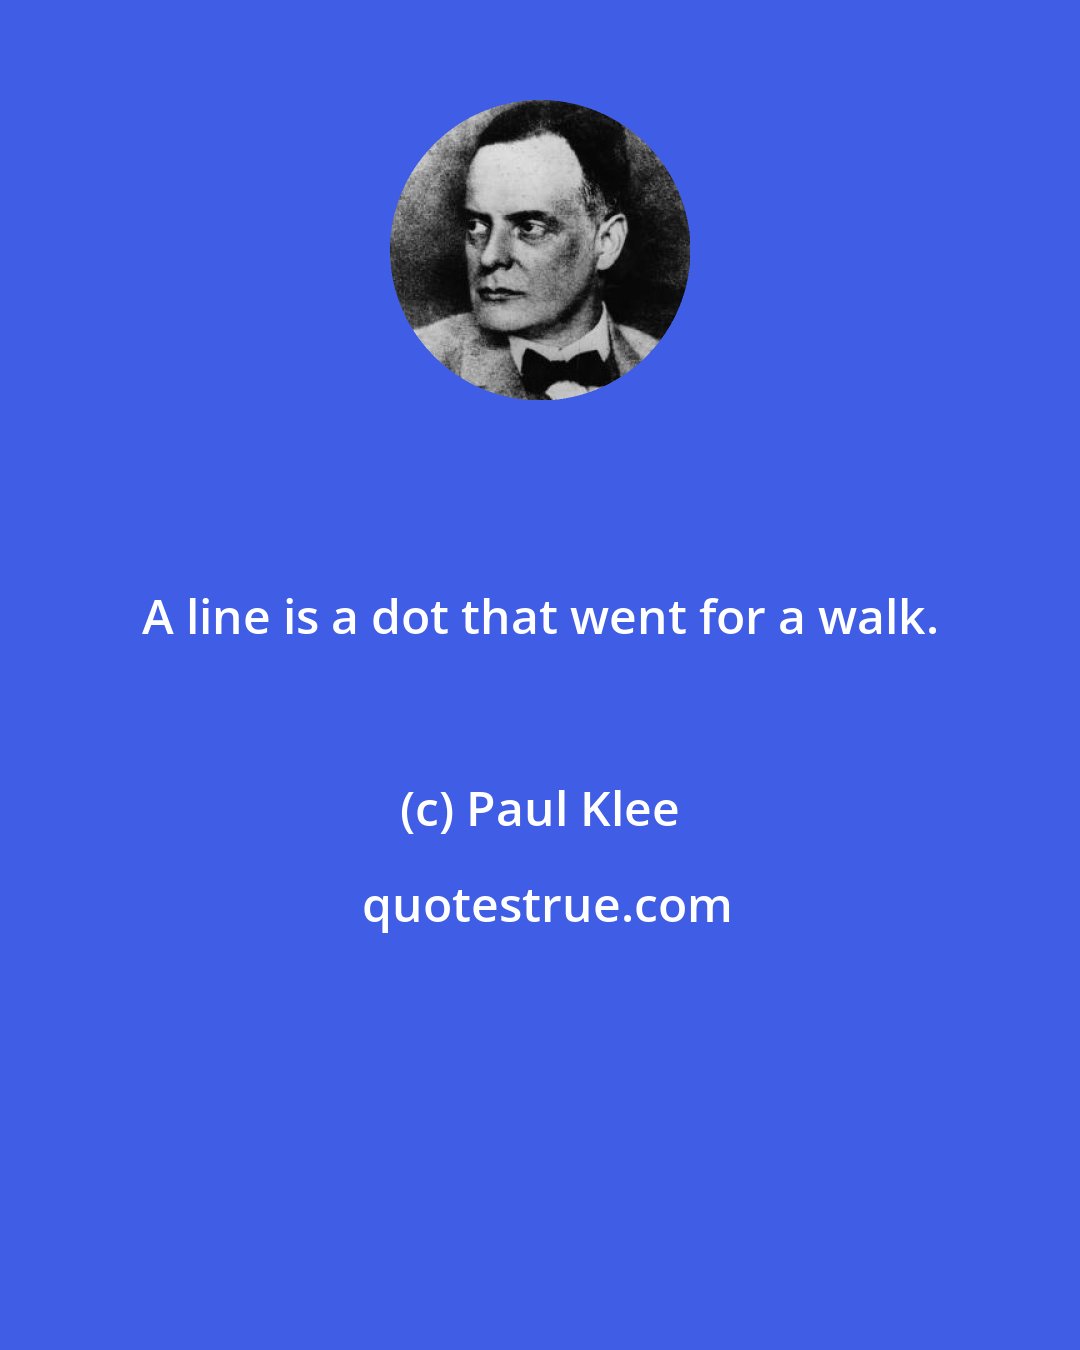 Paul Klee: A line is a dot that went for a walk.